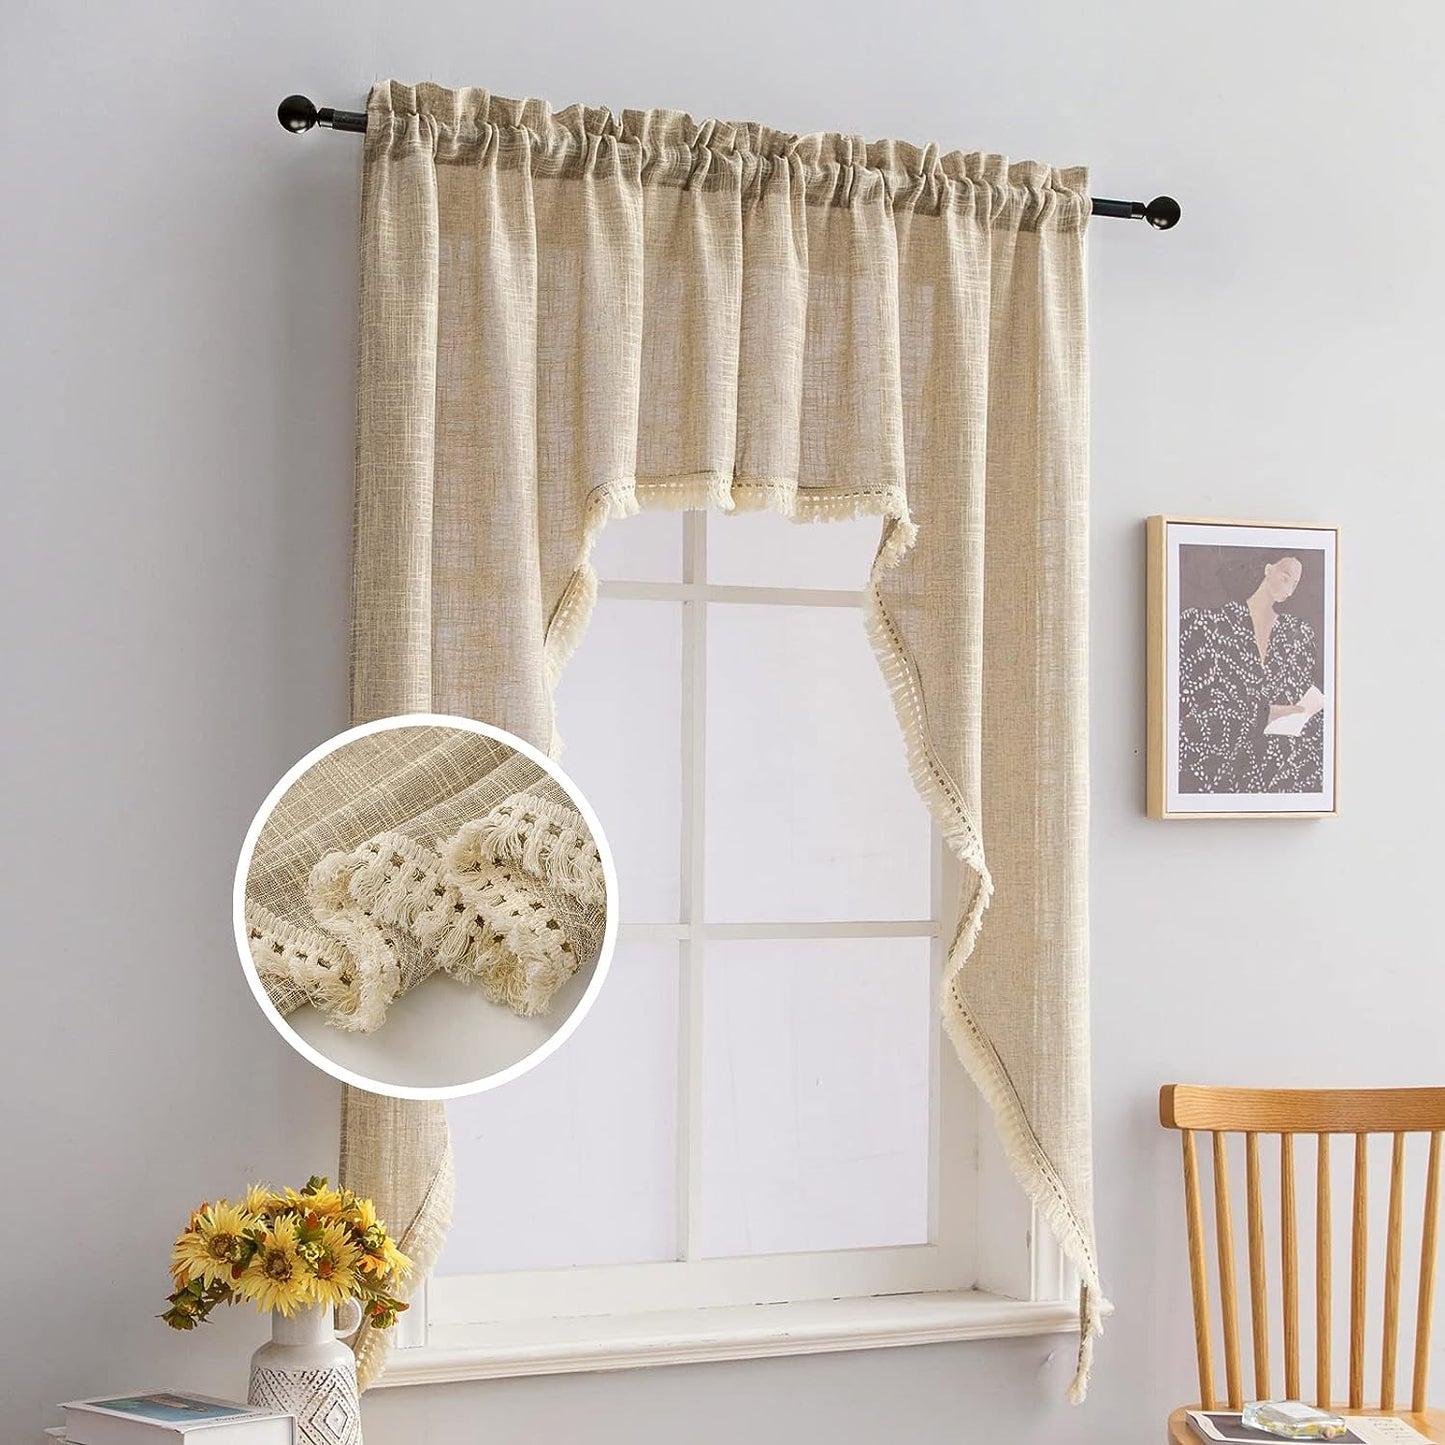 Beda Home Tassel Linen Textured Swag Curtain Valance for Farmhouses’ Kitchen; Light Filtering Rustic Short Swag Topper for Small Windows Bedroom Privacy Added Rod Pocket Design(Nature 36X63-2Pcs)  BD BEDA HOME Taupe 36Wx63L - 2 Panels 